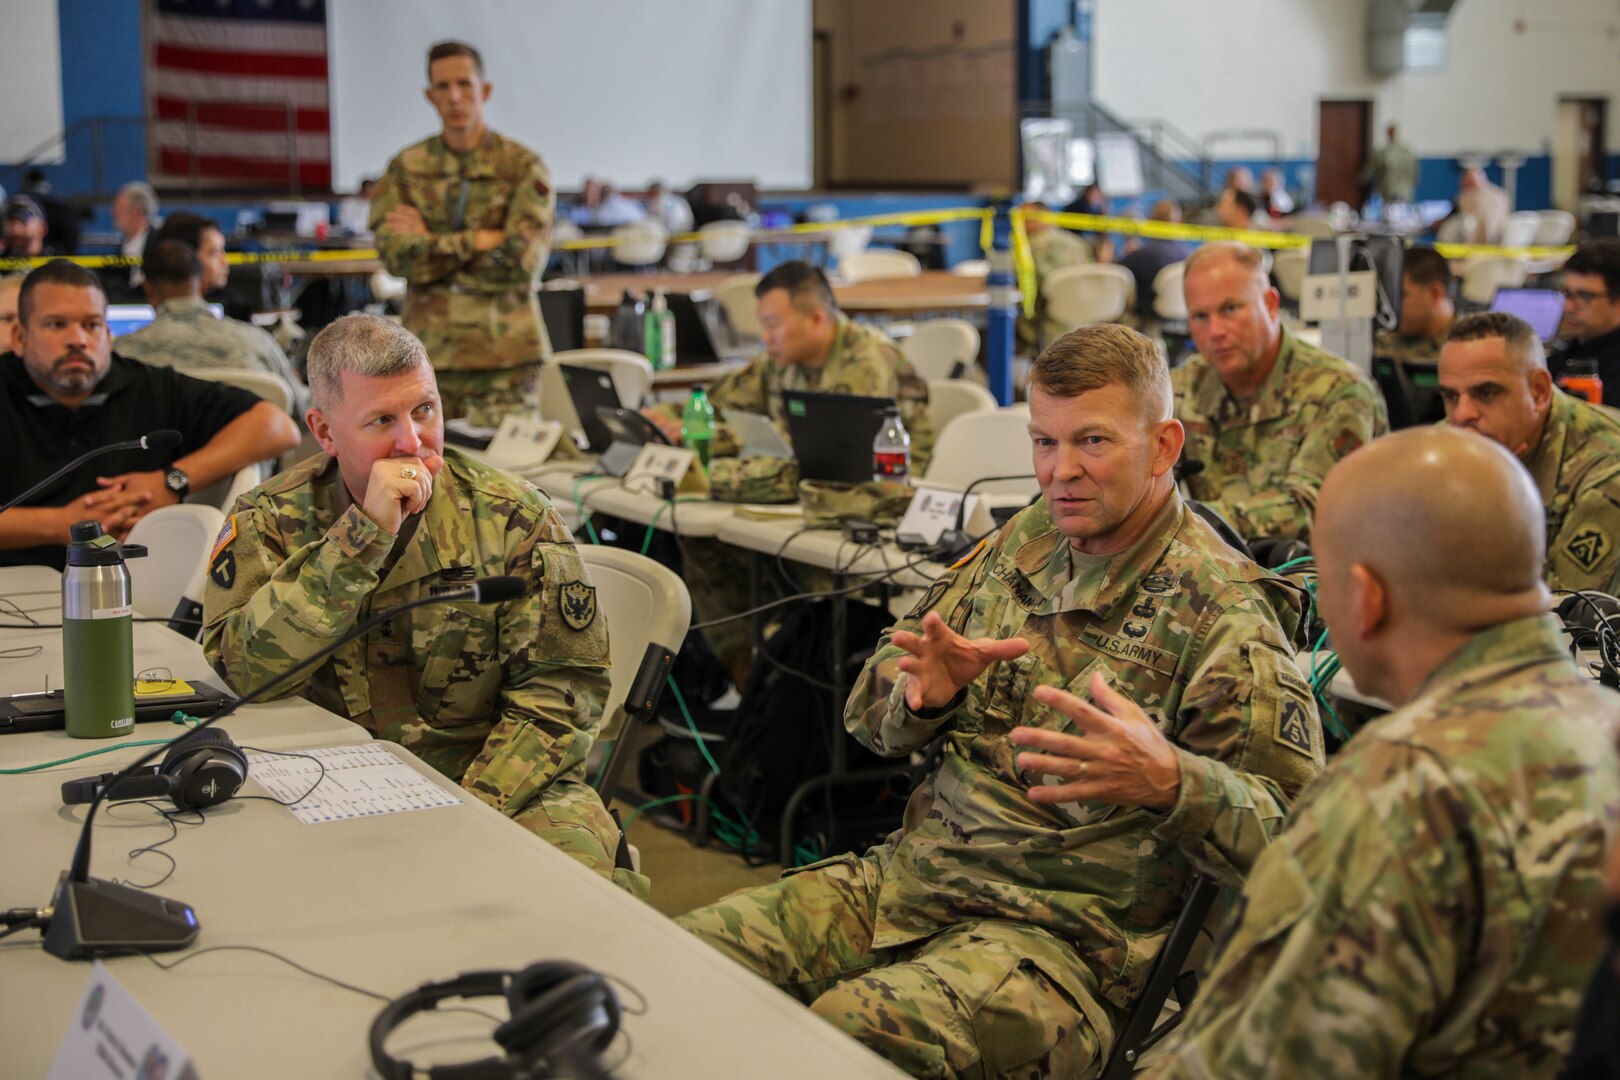 Commander, US Army North (ARNORTH) Lt. Gen. Jeffrey Buchanan speaks with Commander, Joint Task Force Civil Support (JTF-CS) Maj. Gen. William “Bill" Hall (left), and JTF-CS Director of Operations Col. Eric Oh during a ten minute drill as part of Ardent Sentry 2019. The ARNORTH-led exercise was conducted in support of FEMA’s exercise Shaken Fury, which simulated a catastrophic earthquake along the New Madrid Seismic Zone (NMSZ) near Memphis, Tennessee that affected eight states. Exercise Shaken Fury tested the national incident management system. During the exercise, which ran from May 29 - June 5, nearly 100 JTF-CS personnel supported more than 50 command members who were forward-deployed to Nashville, Tenn.; Berry Field, Tenn.; Jackson, Miss.; Jefferson City, Mo. and Ft. Sam Houston, Tx. in response to a notional 7.7 magnitude earthquake in the New Madrid Seismic Zone (NMSZ). Ardent Sentry is a U.S. Northern Command exercise geared toward building and strengthening interagency relationships by providing defense support of civil authorities during the NMSZ earthquake scenario. (Official DoD photo by Mass Communication Specialist 3rd Class Michael Redd/released)